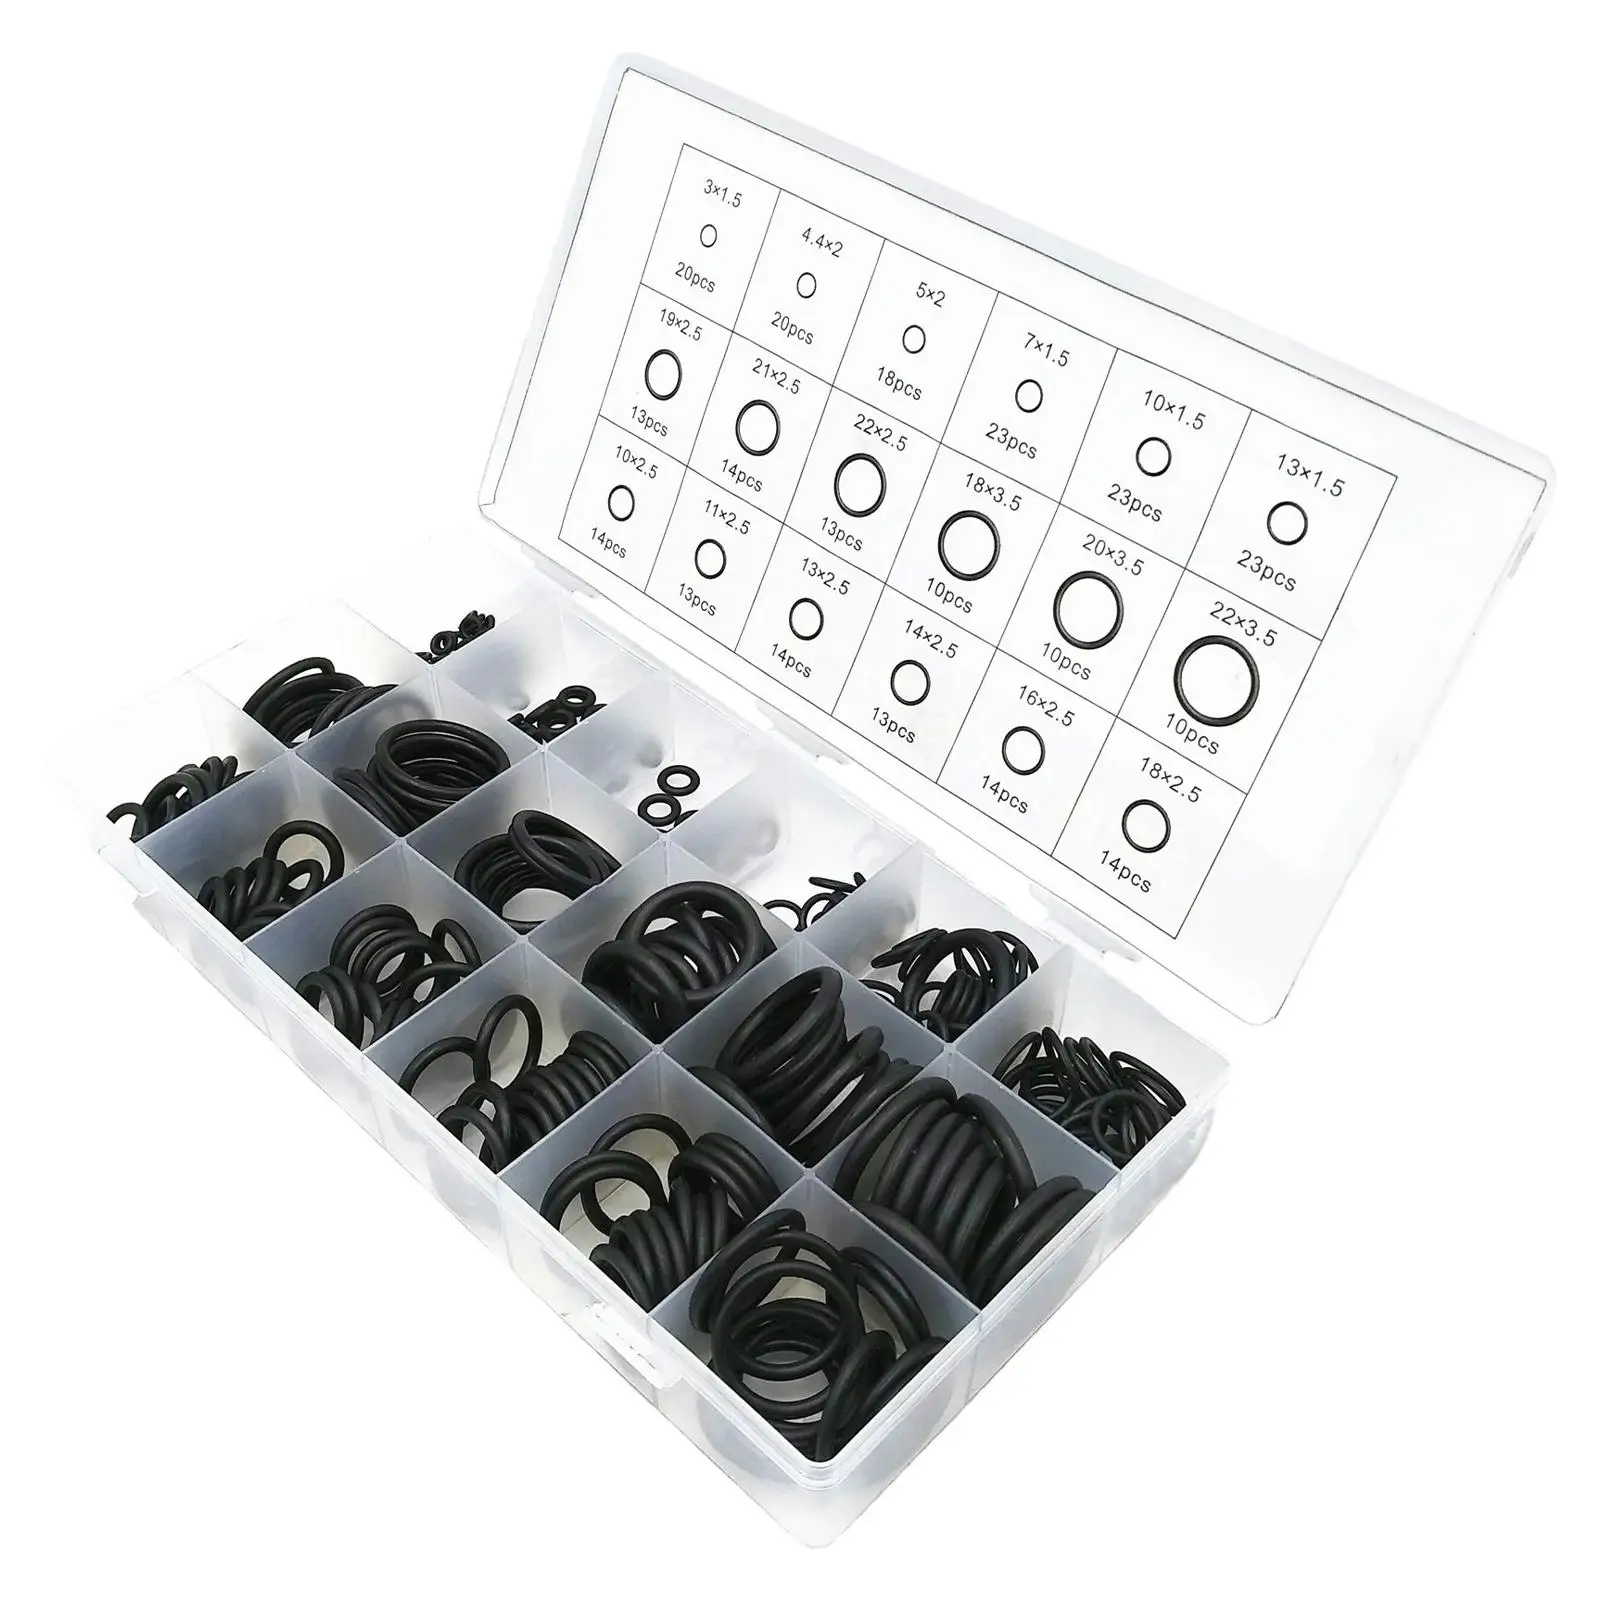 279Pcs O Ring Assortment Set 18 Different Sizes Assorted Sealing Washer Black Small Round for Car Auto Repairing Plumbers